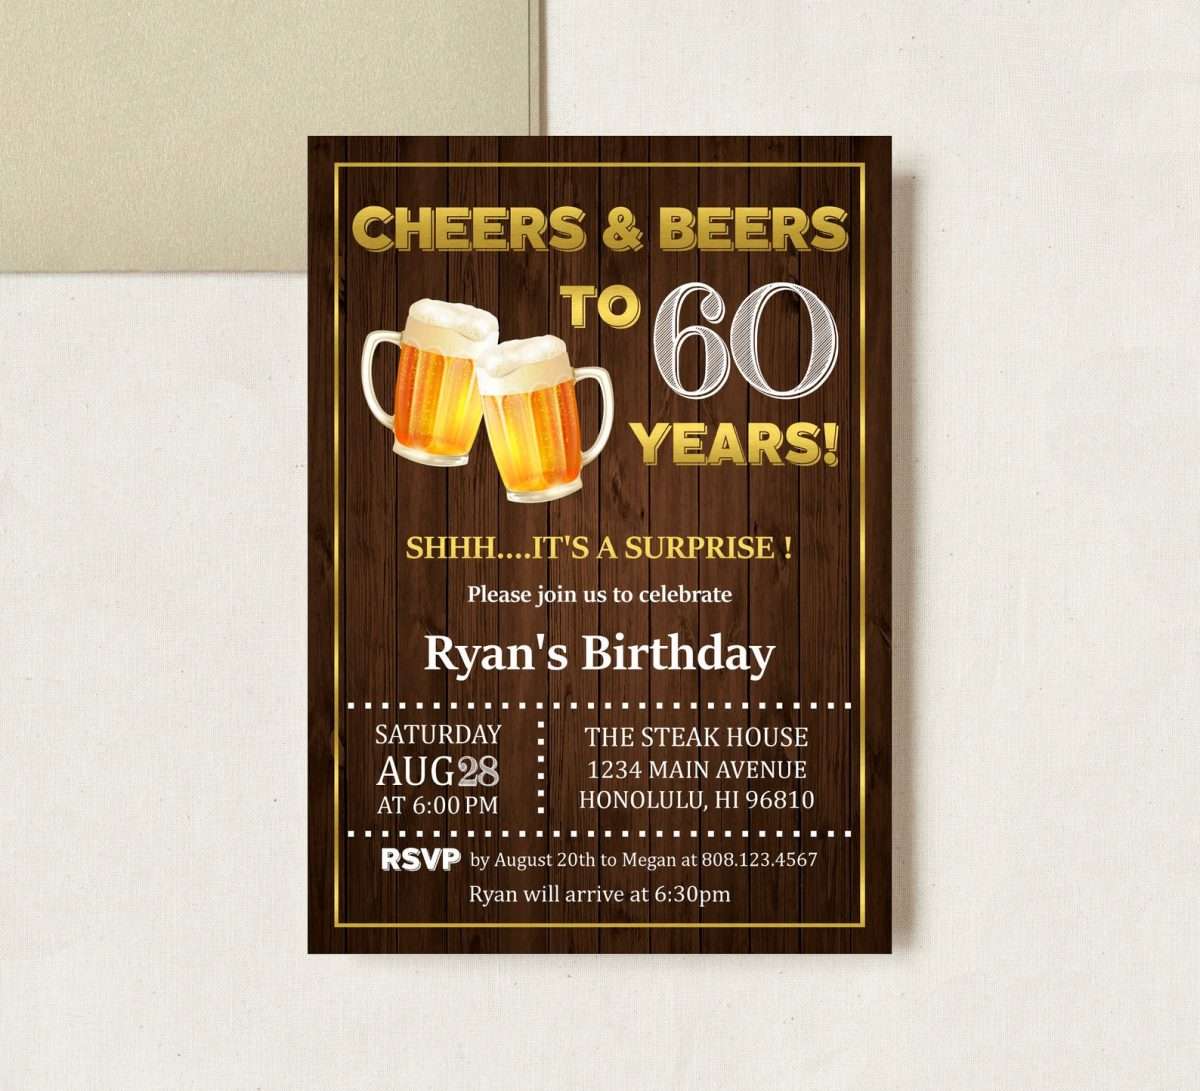 60th Birthday Invitations for Men Cheers and Beers to 60 years